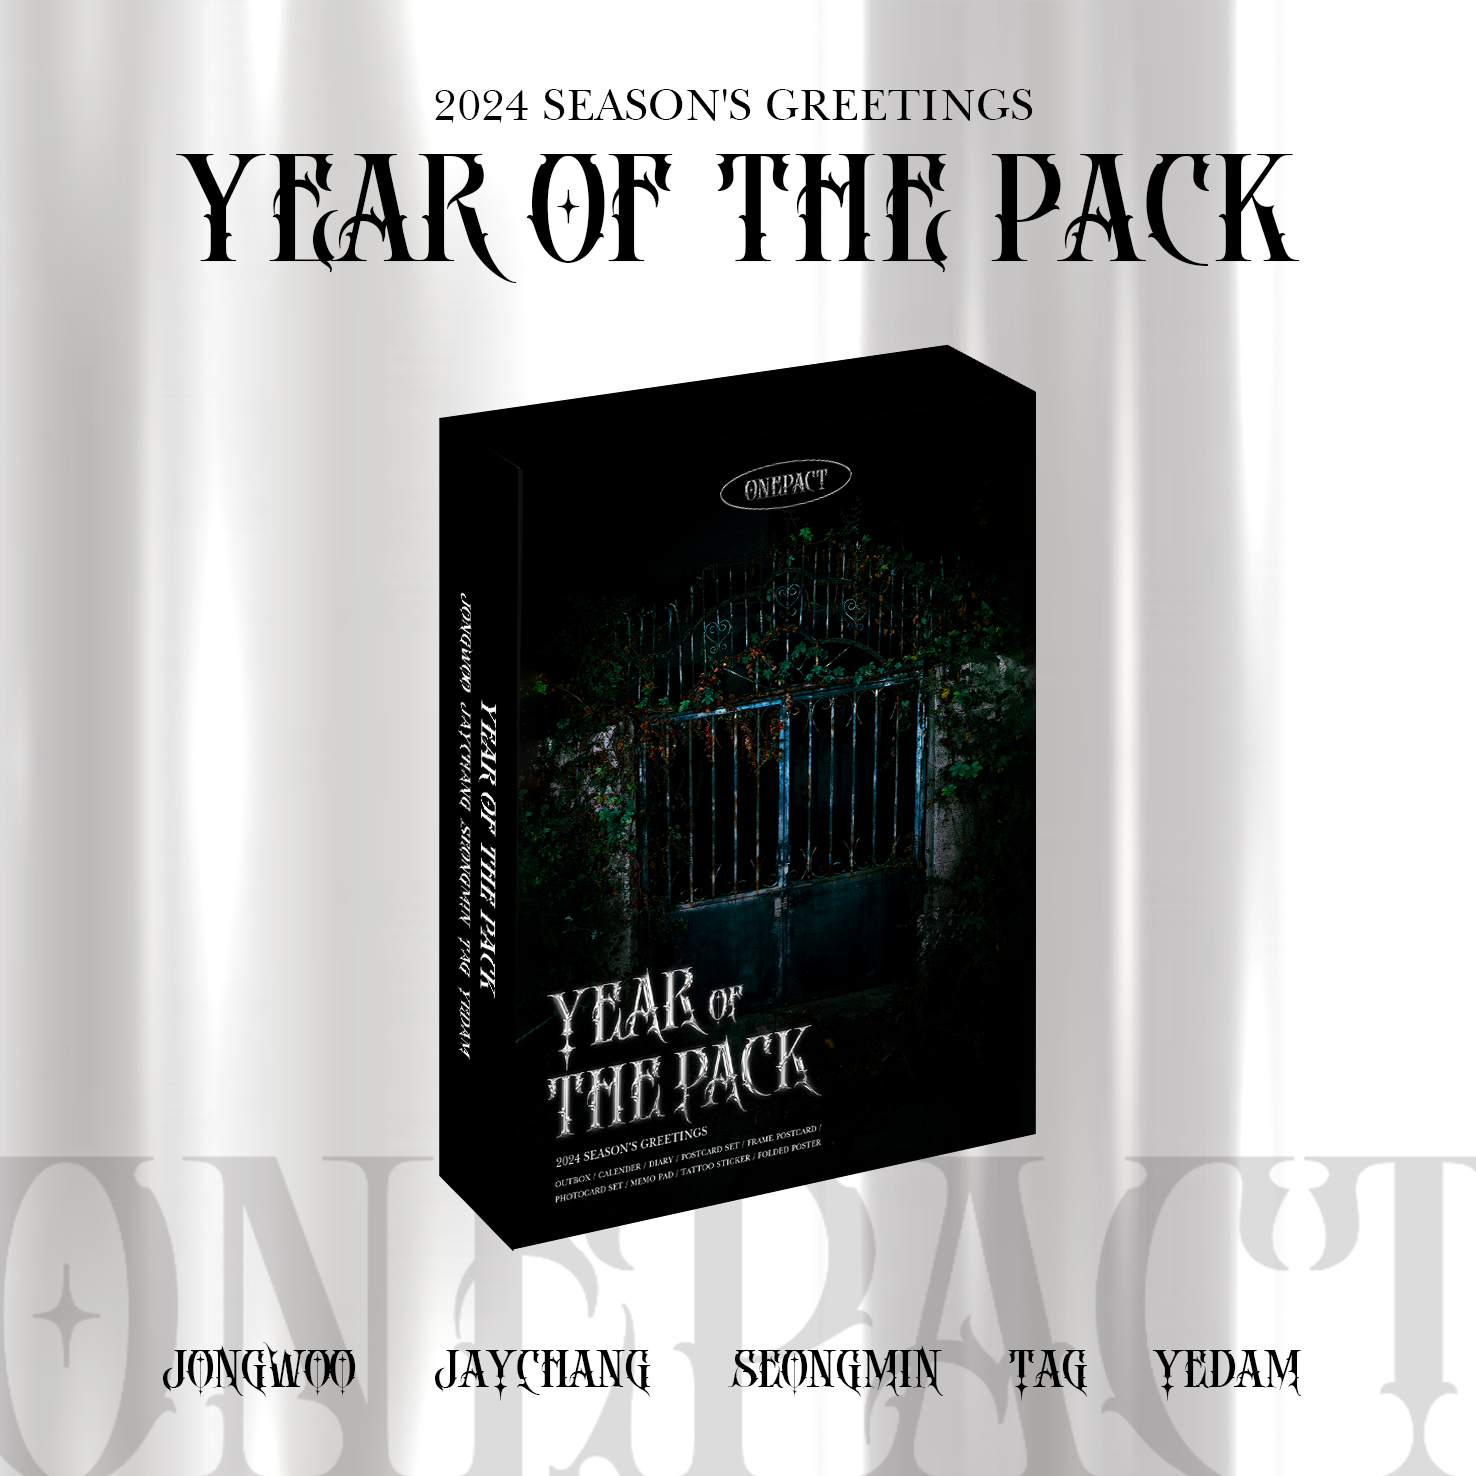 ONE PACT - 2024 SEASON’S GREETINGS Year of the Pack